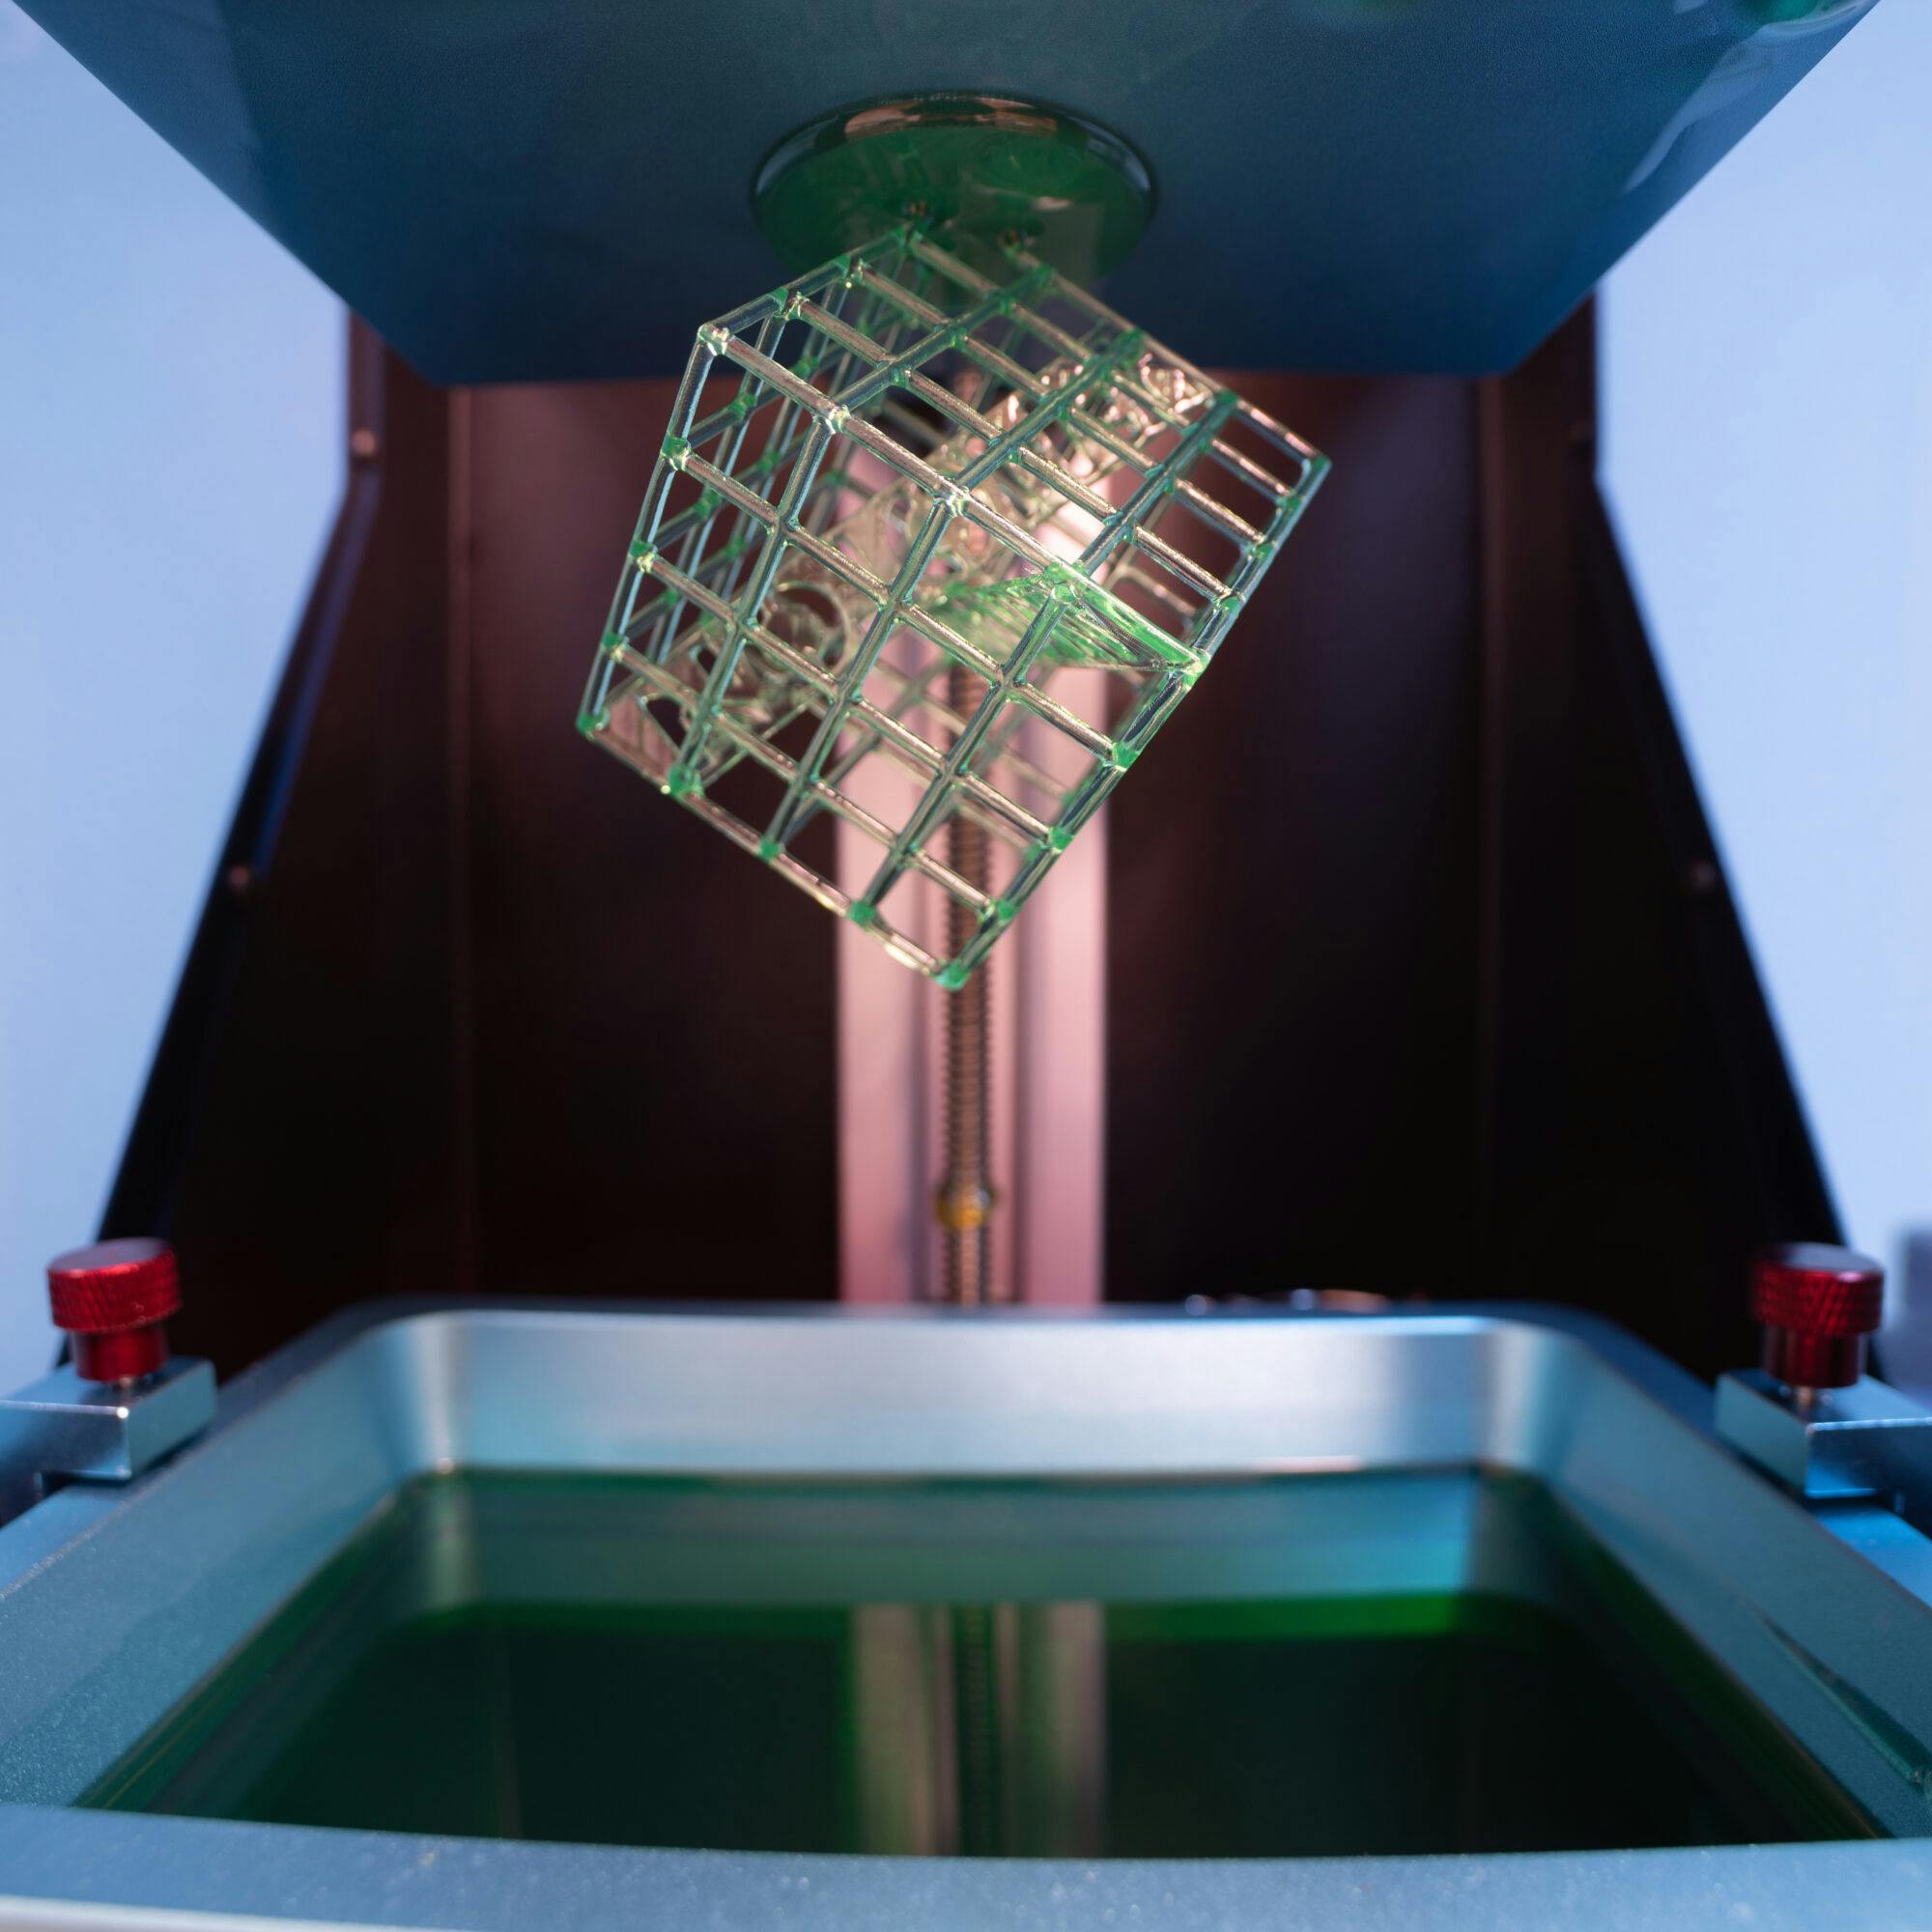 DLP and SLA 3D-printing are both Vat photopolymerization processes where a photopolymer bed is exposed to UV light to shape a 3D-printed object.